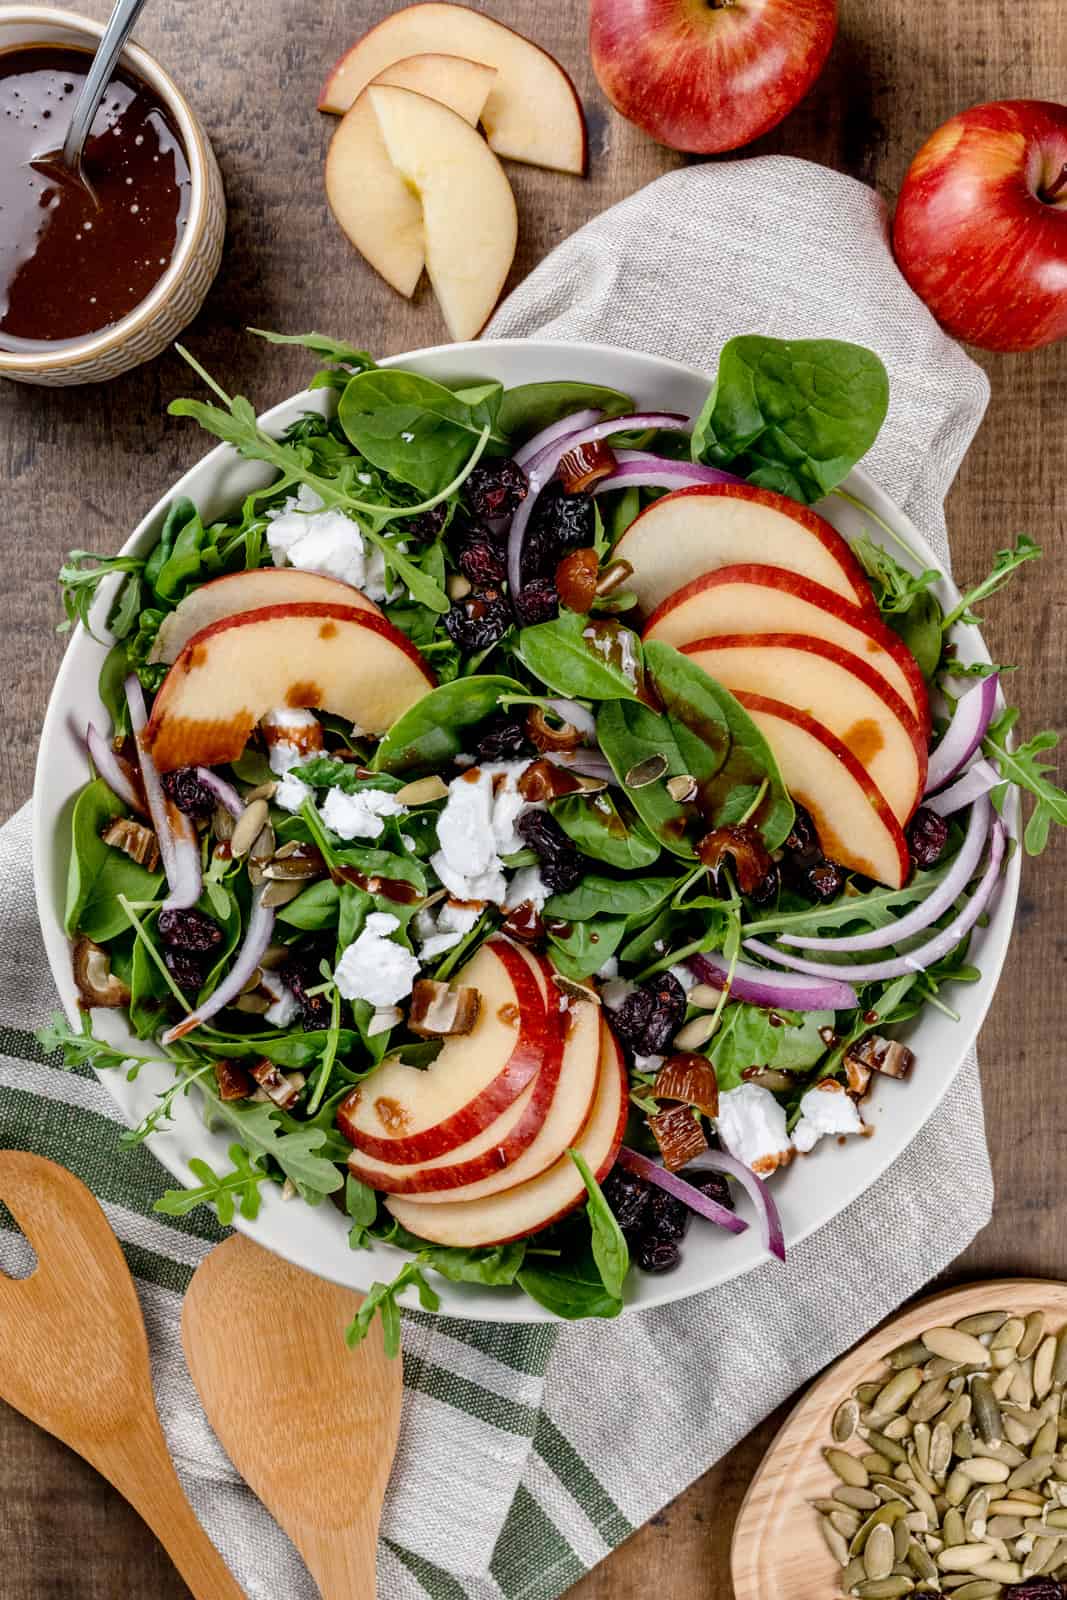 A big bowl of a salad filled with apples, greens, red onion, feta cheese, and dried fruits. It's on a wood tabletop surround by other ingredients like apples and pumpkin seeds. A small bowl of extra balsamic dressing is in the top left.